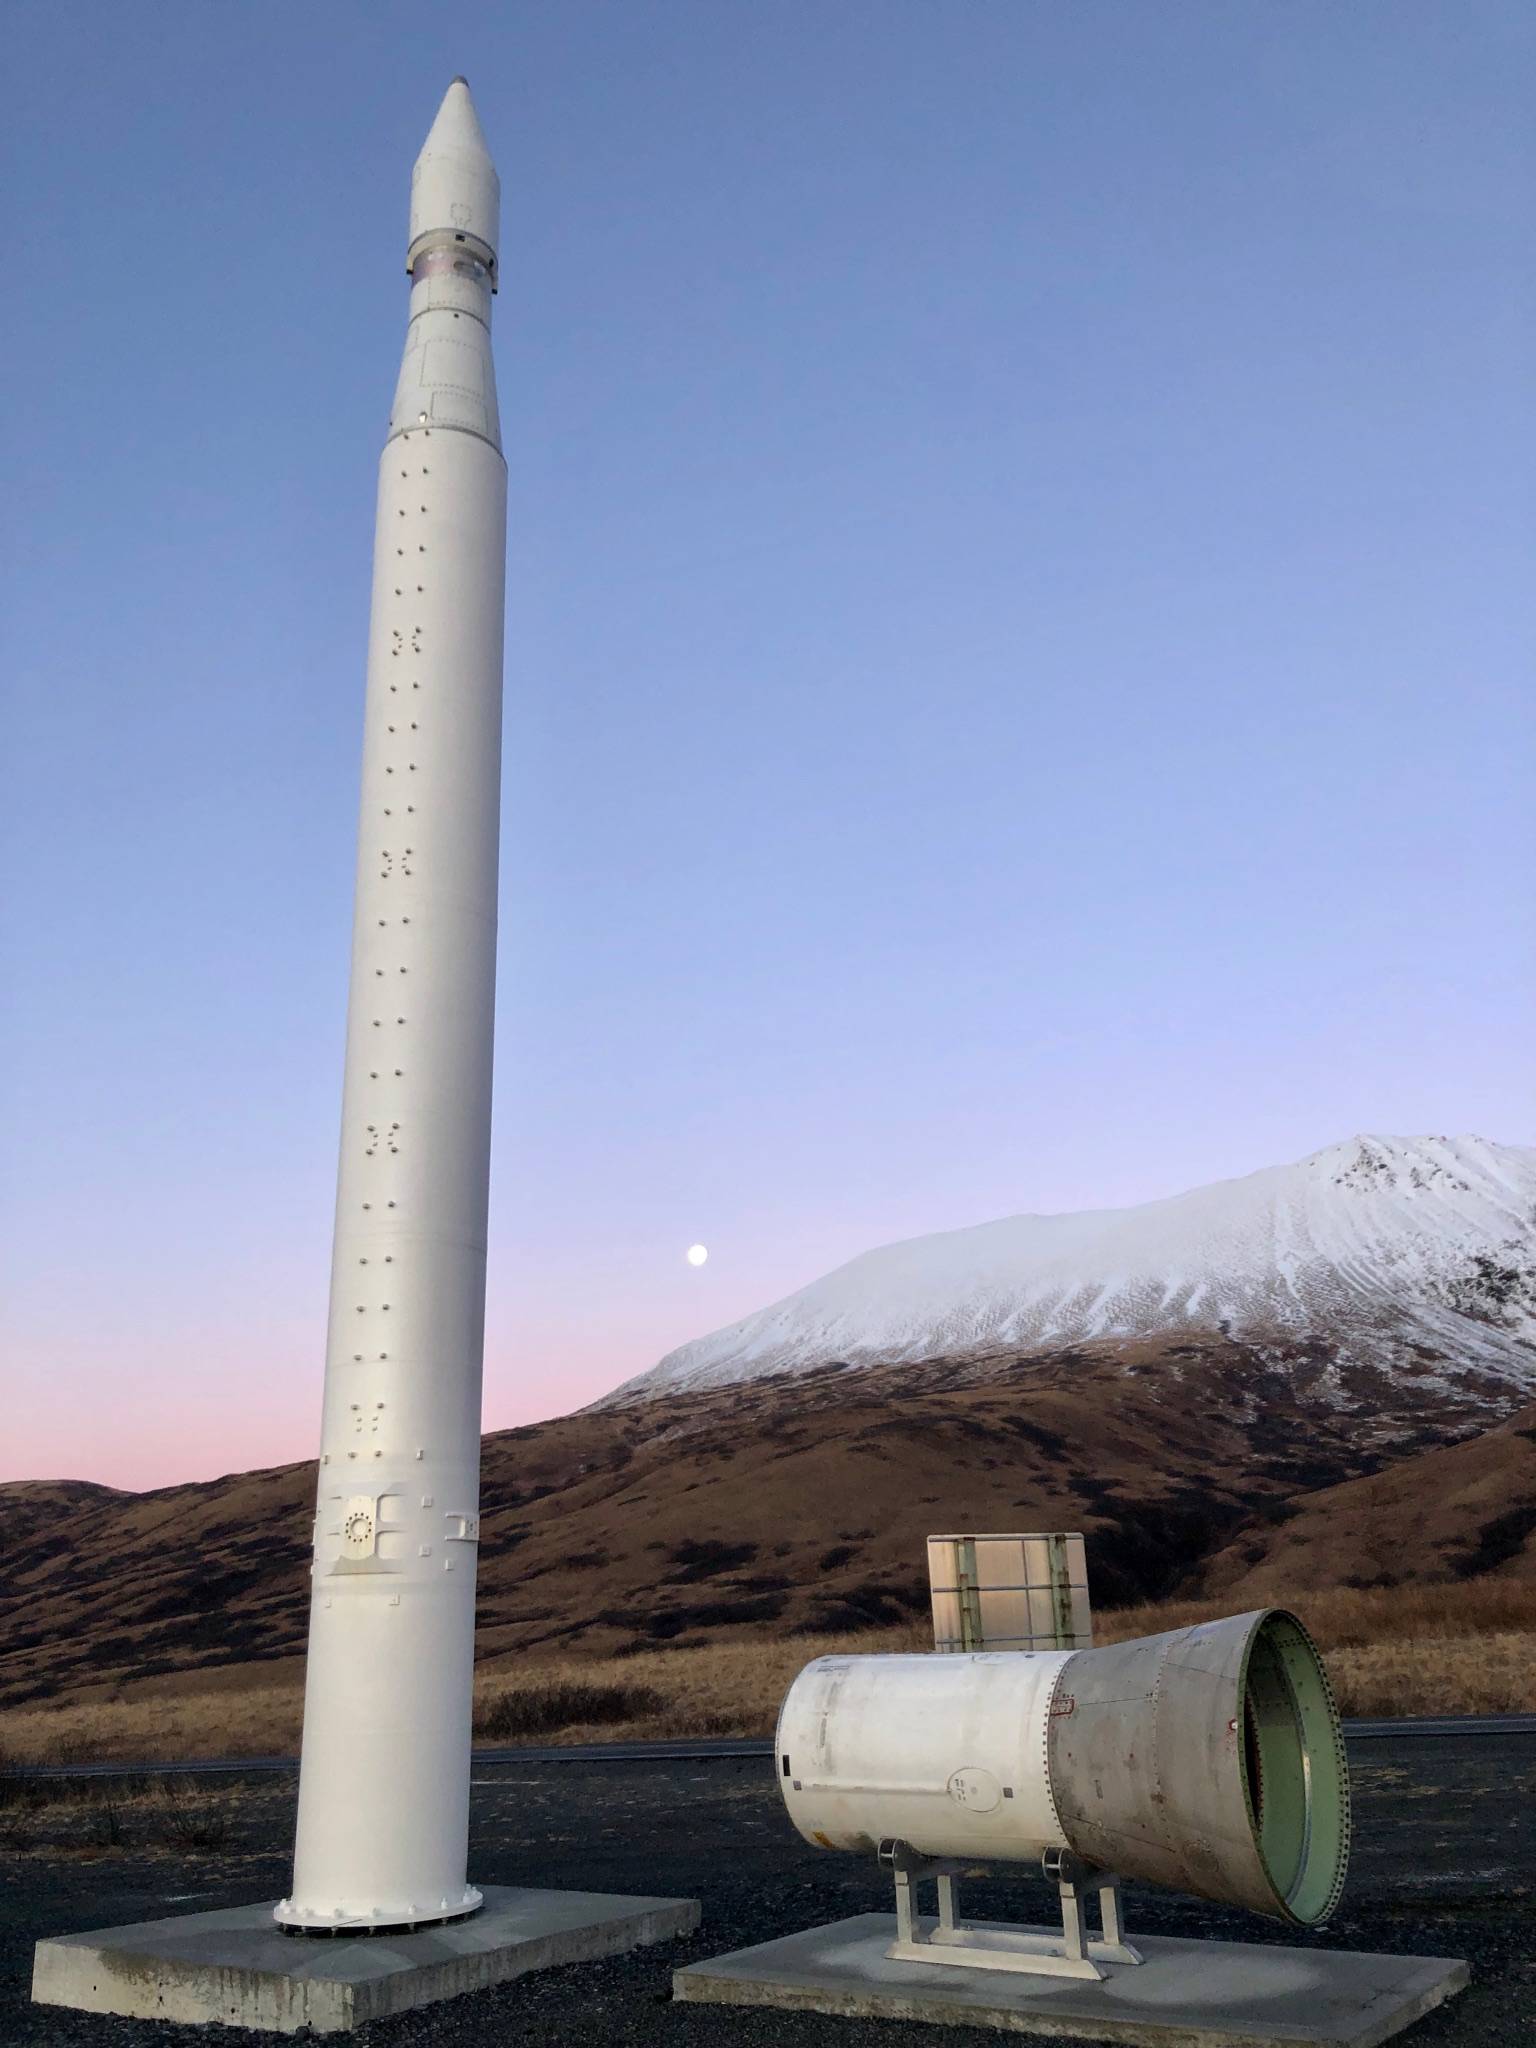 Pending an environmental assessment more launches could happen at the Pacific Spaceport Complex - Alaska. (Courtesy Photo | Alaska Aerospace Corporation)